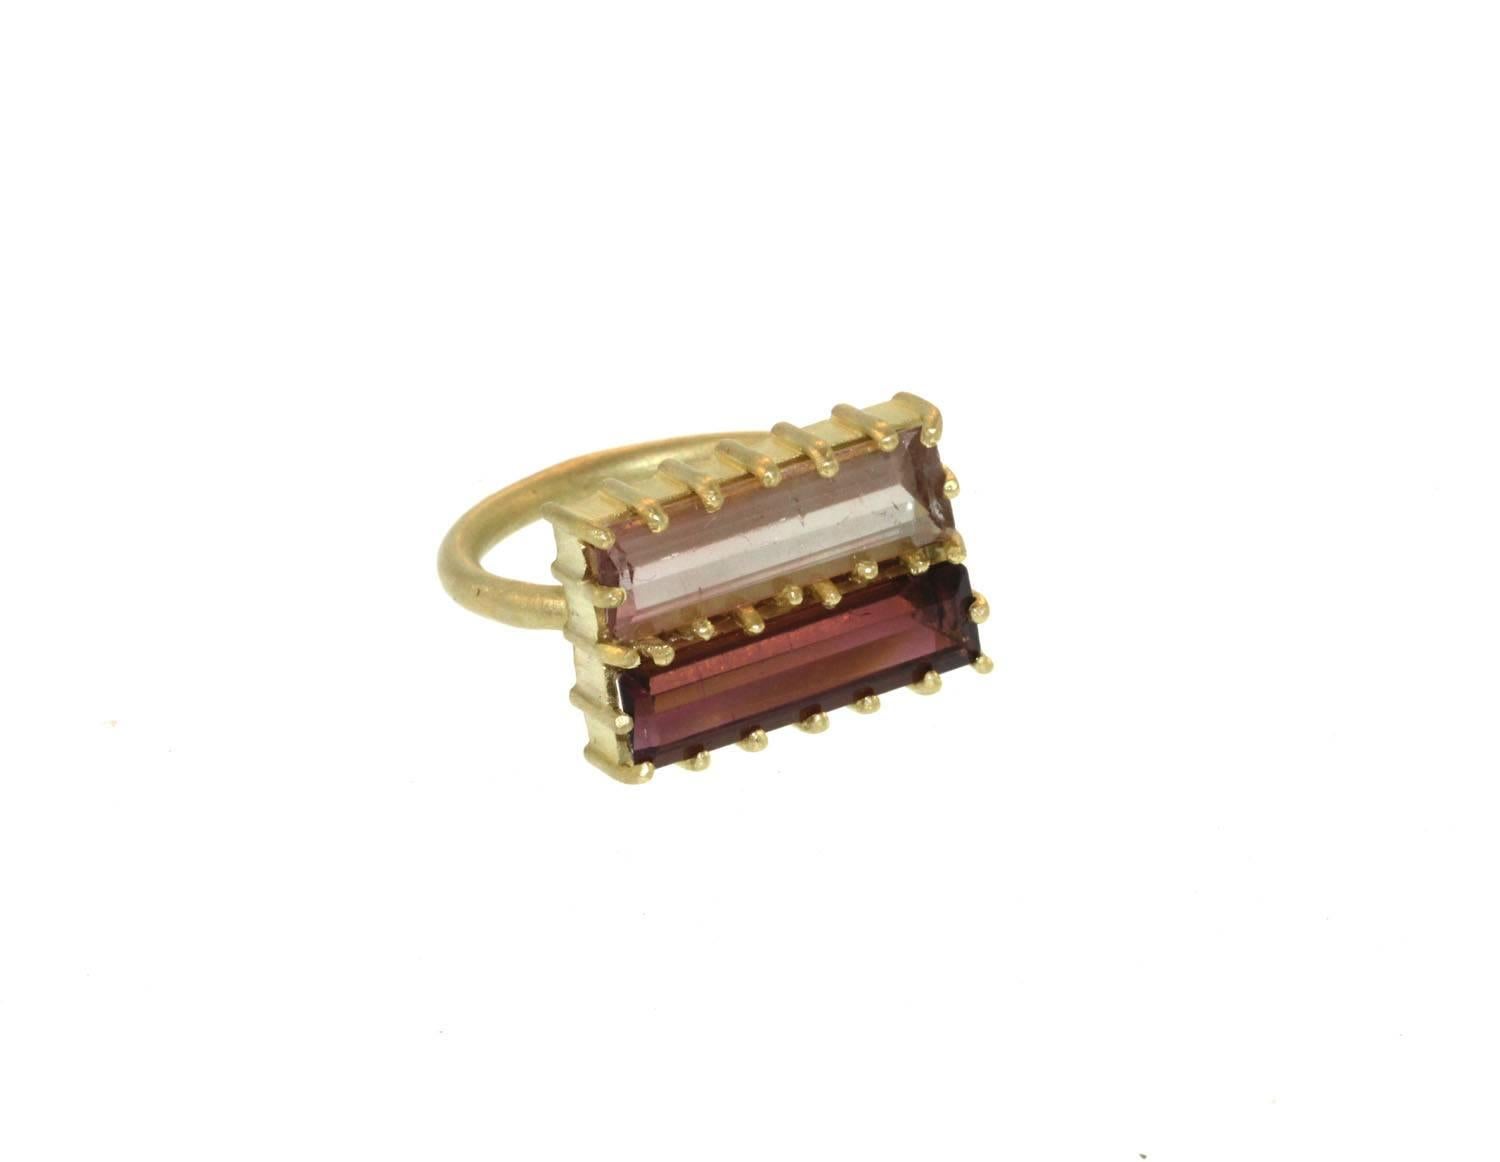 A striking ring with nice structure. This ring has two beautifully colored tourmaline baguettes prong set in 18k gold. One baguette has a light pink color while the other is of a darker mauve color. Each baguette measures approximately 18mm x 6mm.